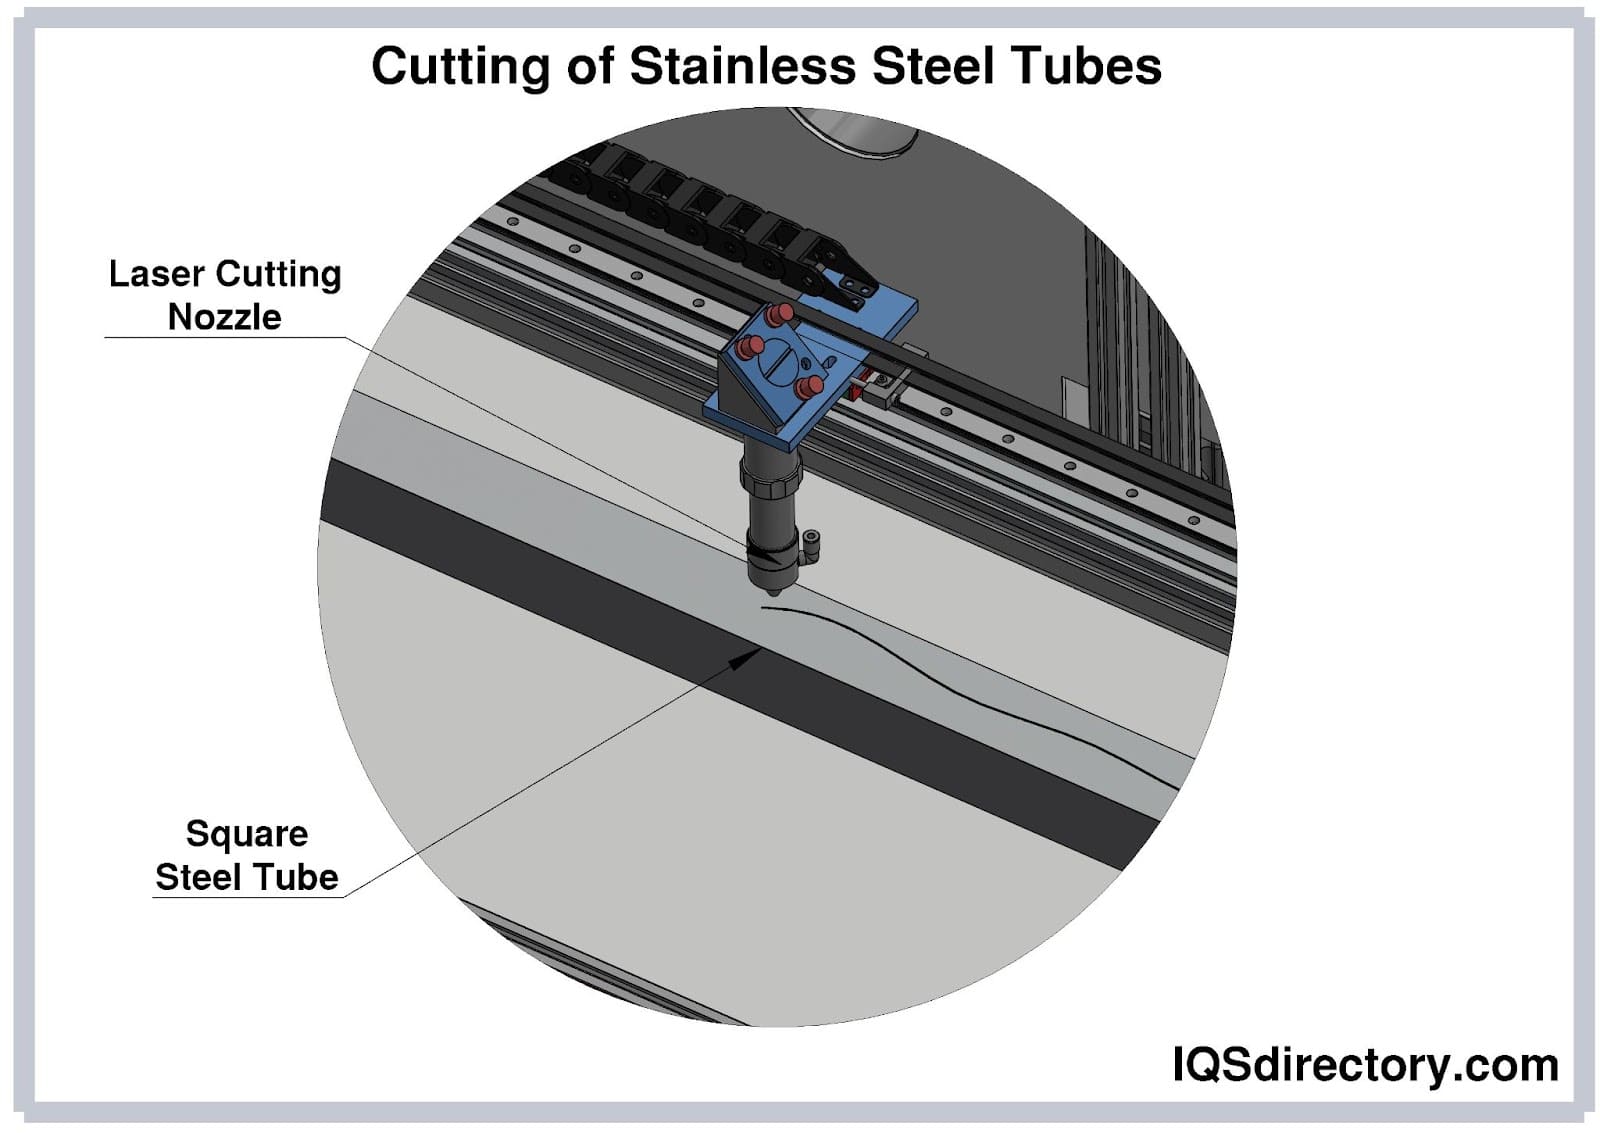 Cutting of Stainless Steel Tubes